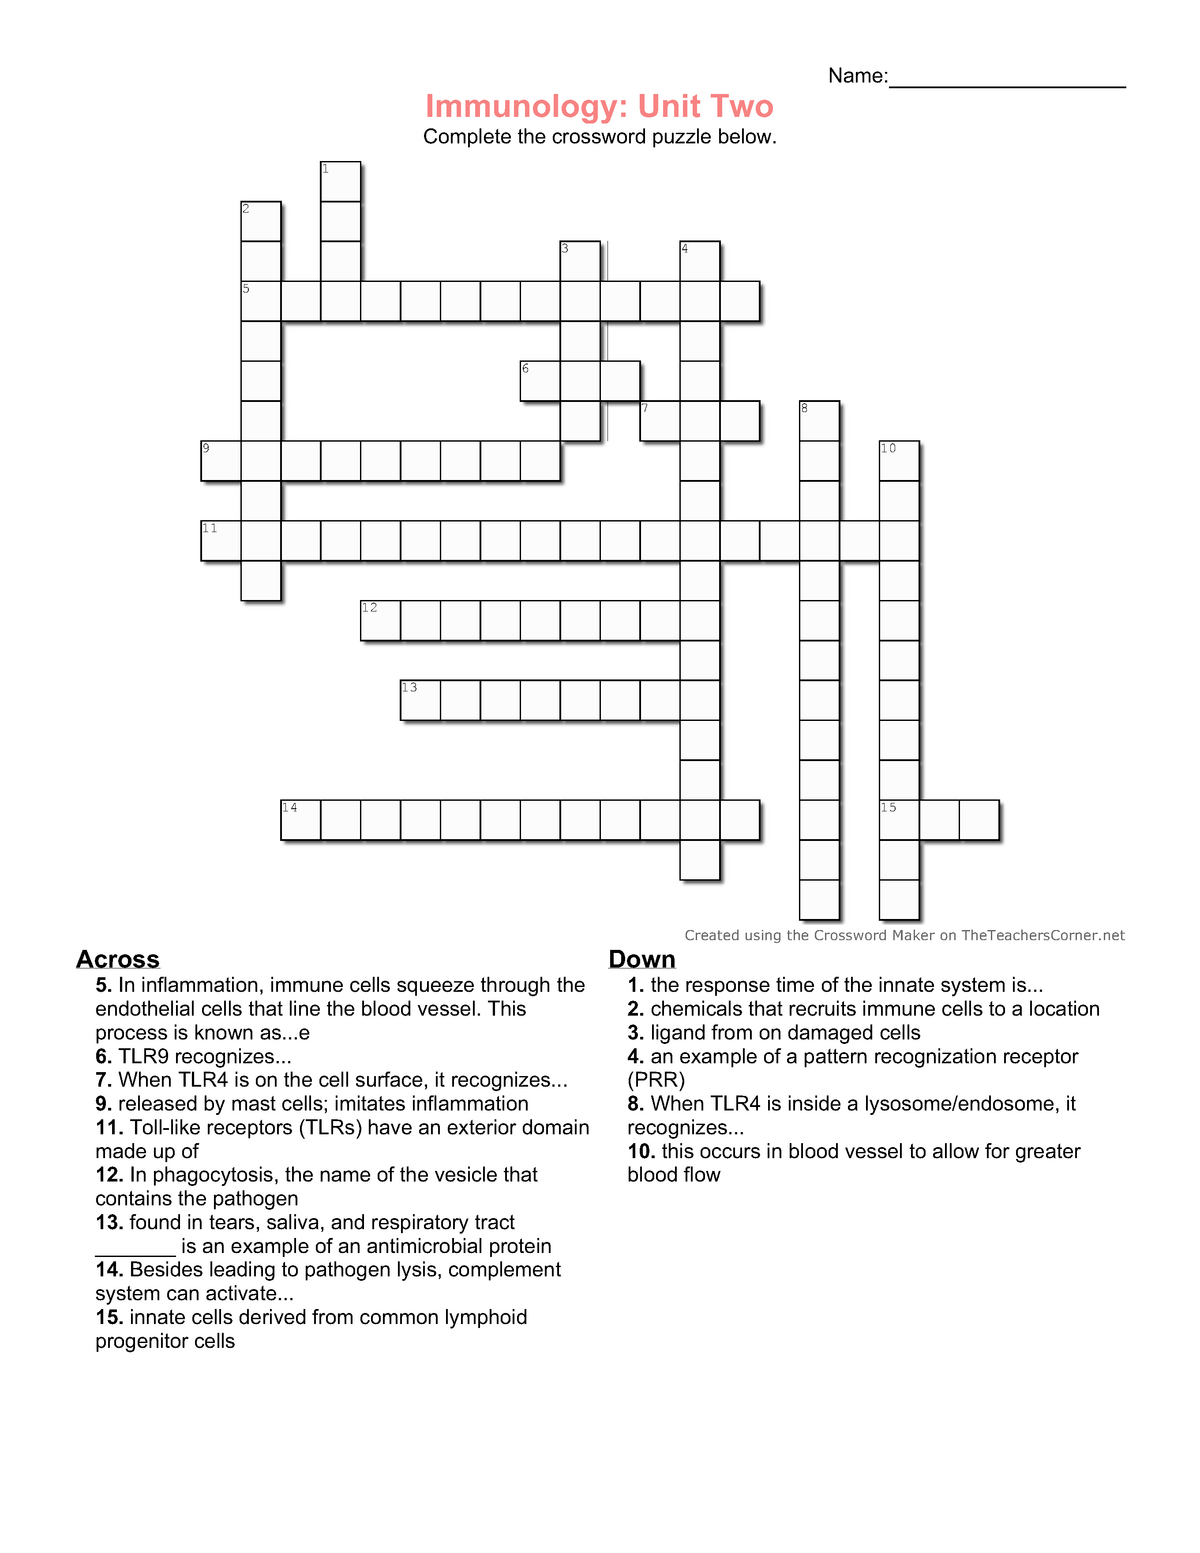 Immunology Unit 2 Crossword Across In inflammation immune cells